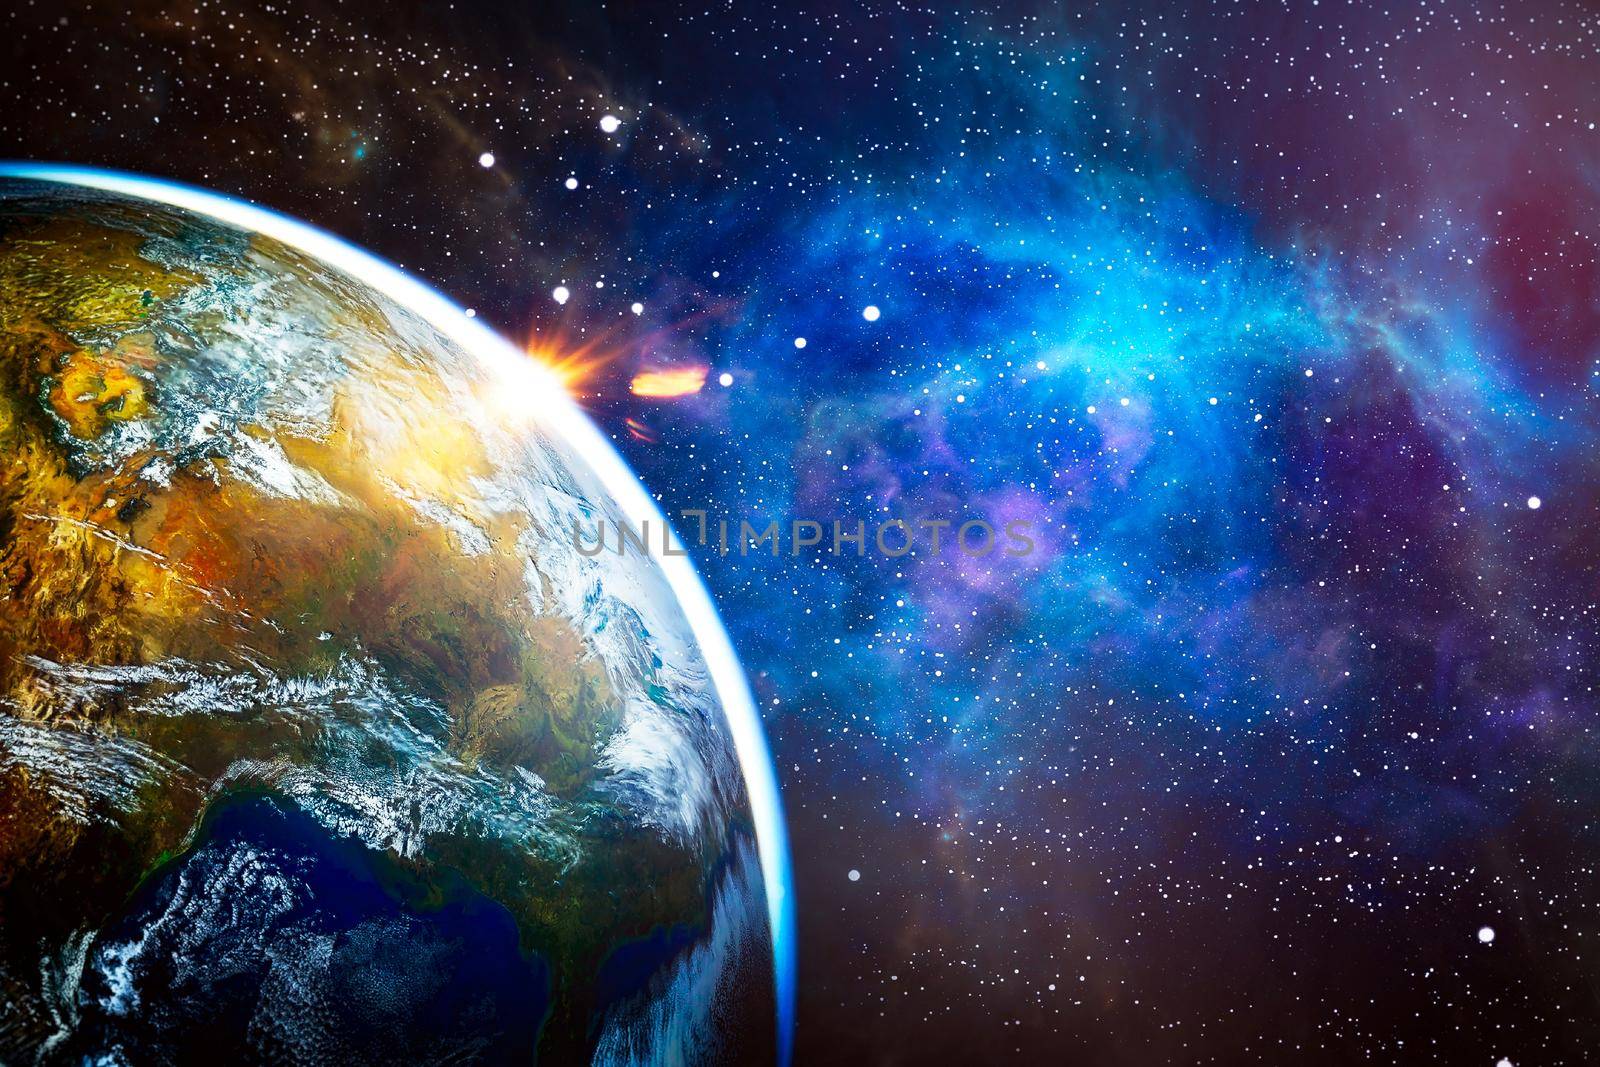 Science fiction fantasy in high resolution ideal for wallpaper. Elements of this image furnished by NASA by Maximusnd